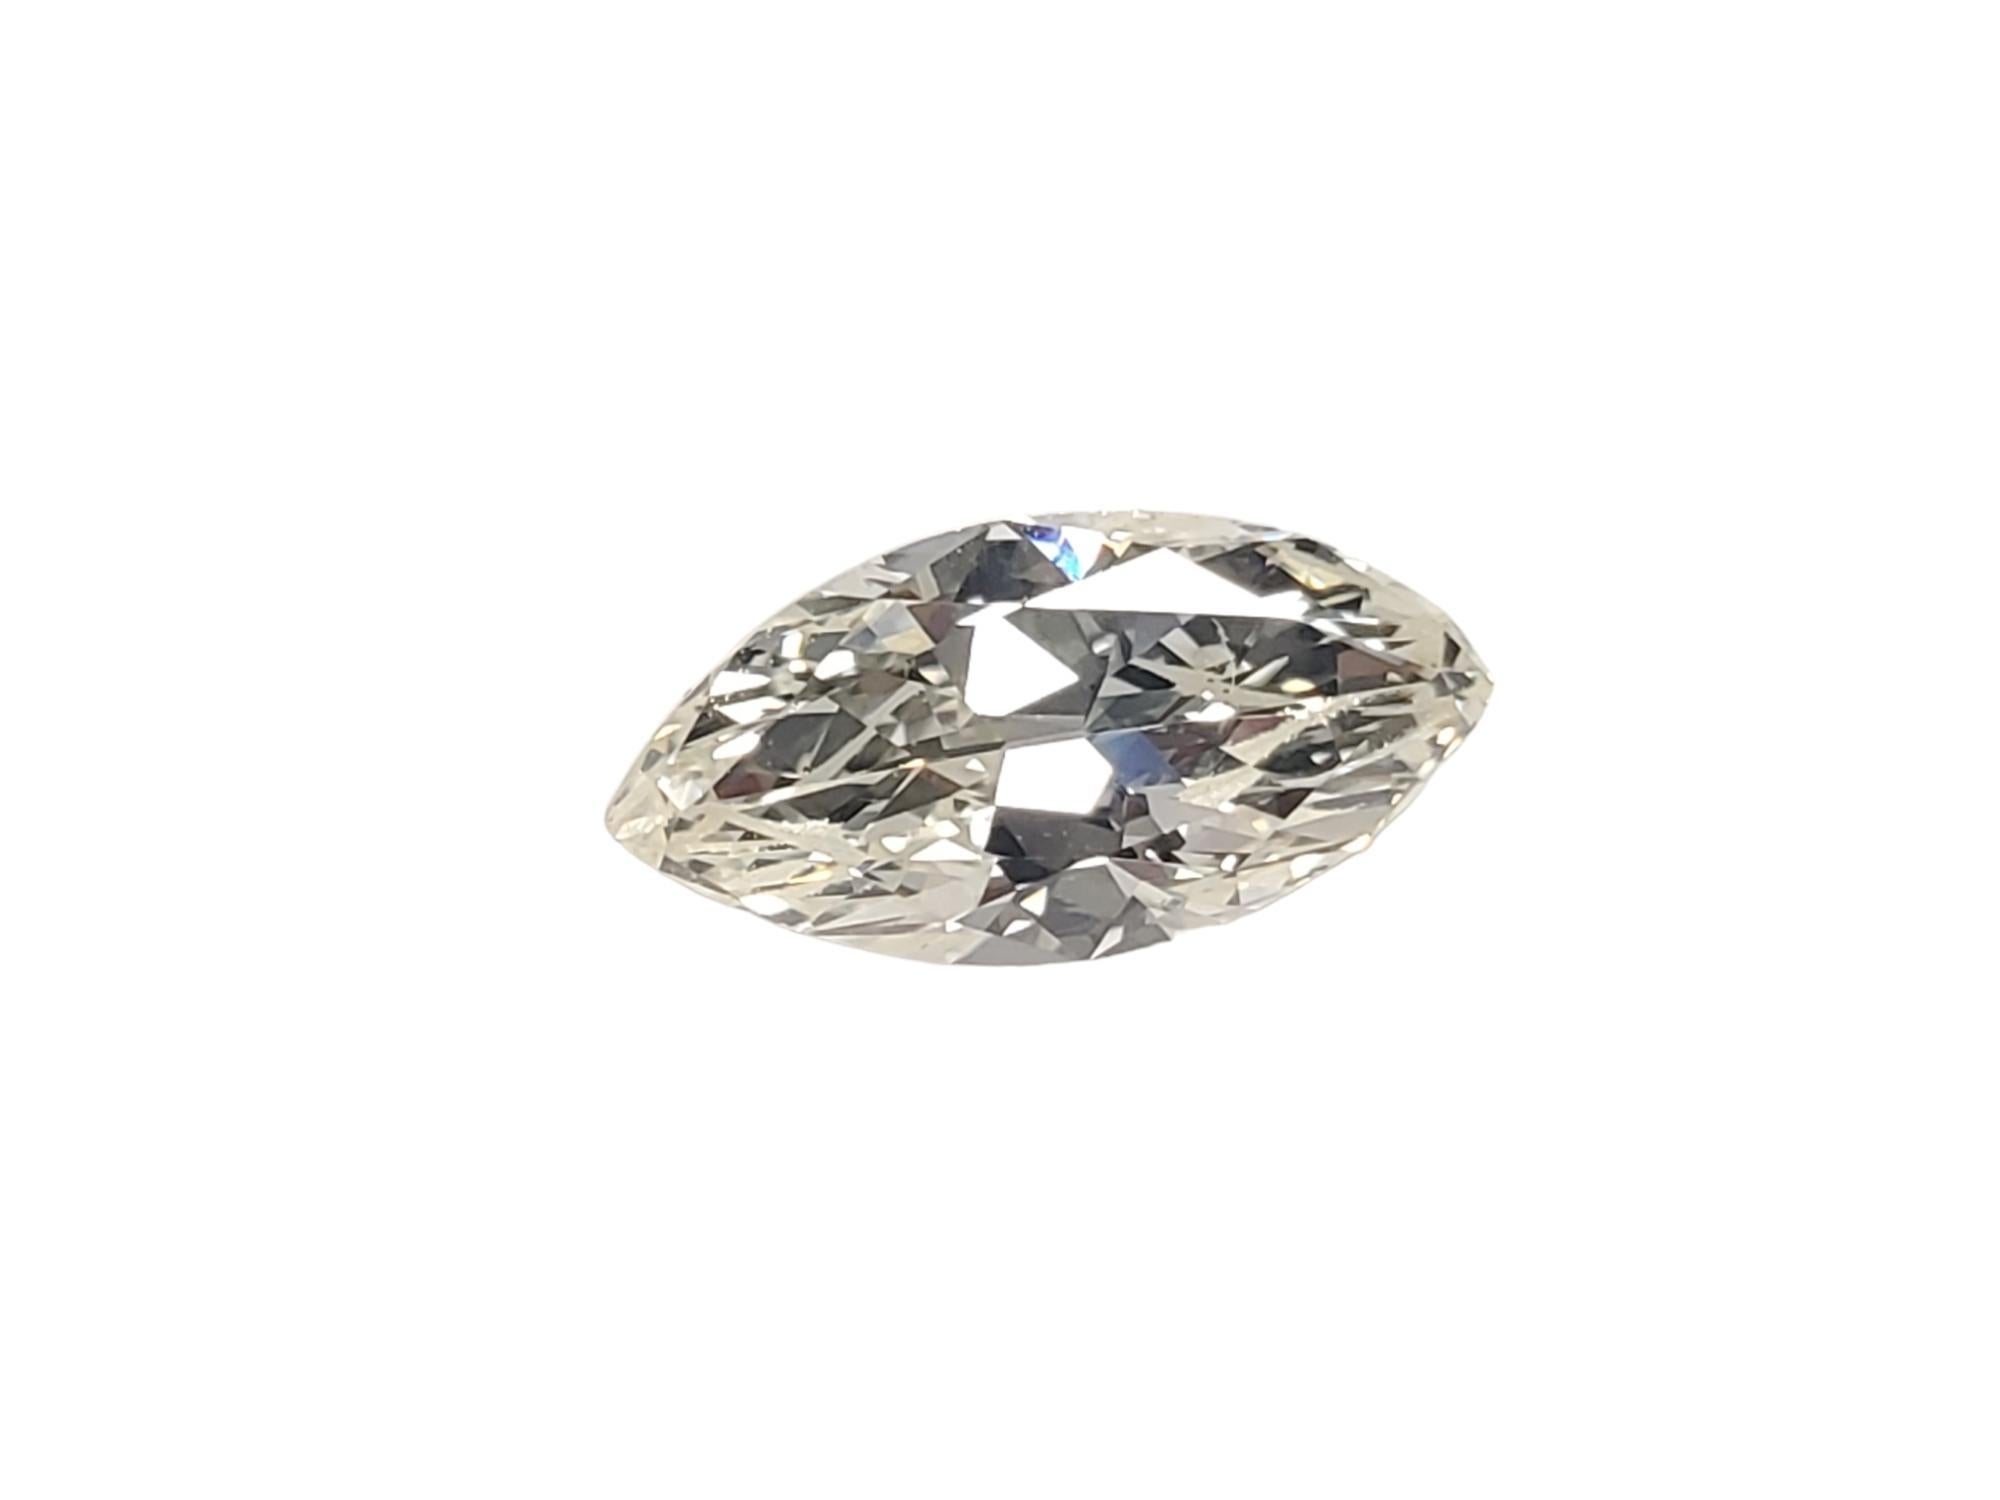 Antique Marquise Cut Diamond 2.19ct True Old Natural Diamond KL VS-SI1 In Good Condition For Sale In Overland Park, KS